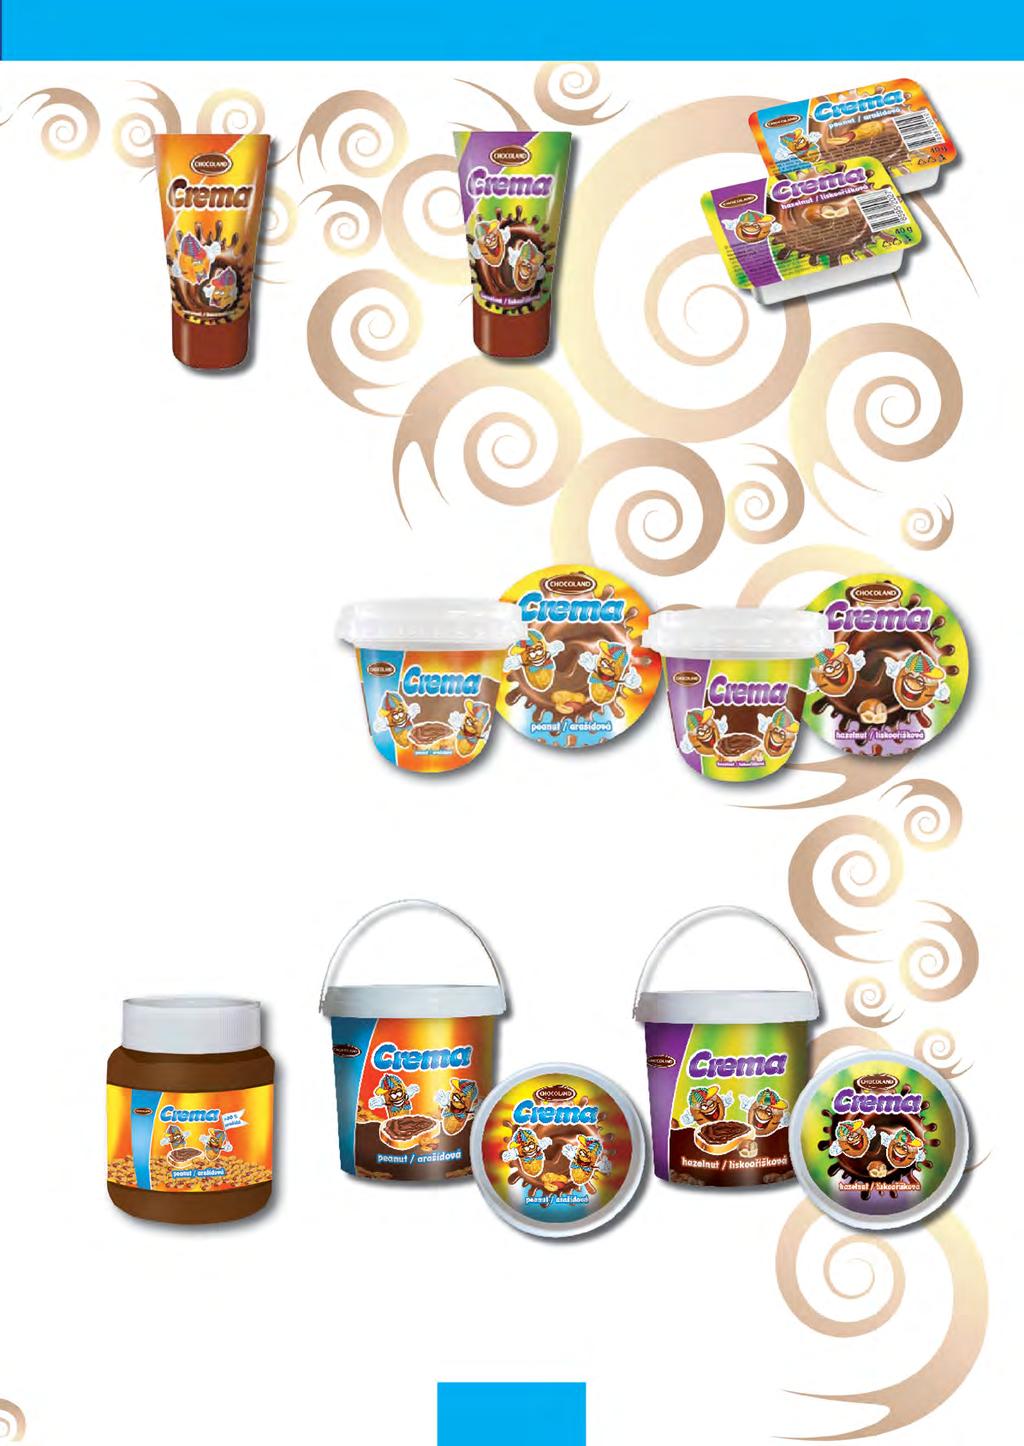 Spreads CREMA caramel tube 40 g Art. 211 000 002 8594033273033 Cocoa, hazelnut and s are among the confectionery products with great and stable sales potential and an ever rising consumer demand.